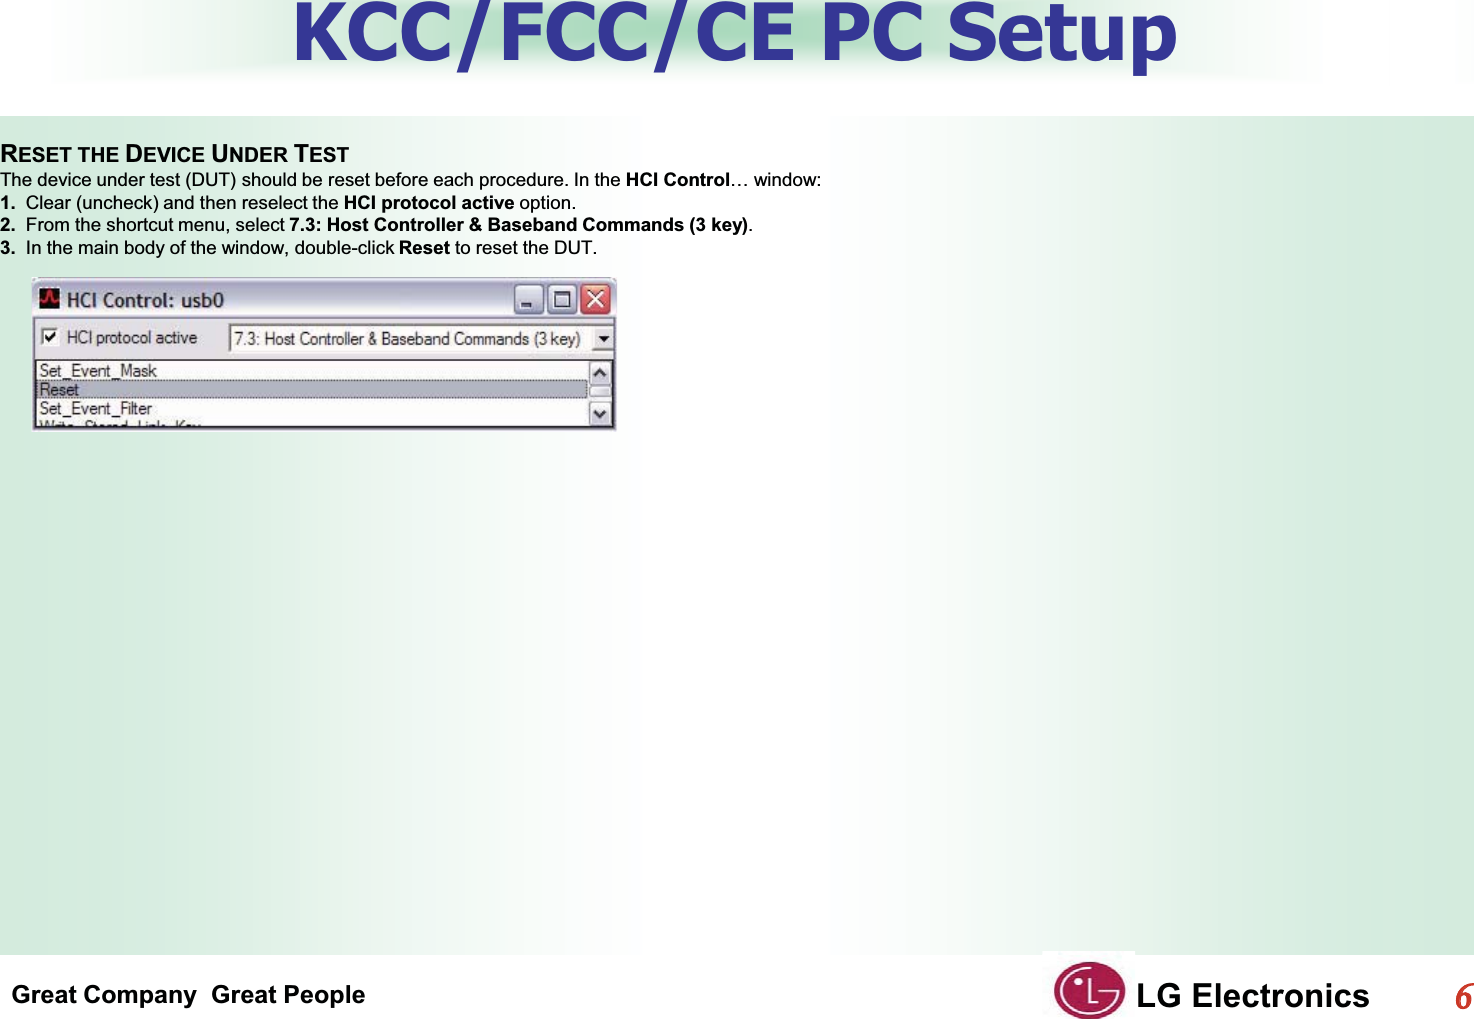 Great Company  Great People LG Electronics66  KCC/FCC/CE PC SetupGRESET THE DEVICE UNDER TESTGThe device under test (DUT) should be reset before each procedure. In the HCI Control… window:G1.  Clear (uncheck) and then reselect the HCI protocol active option.G2.  From the shortcut menu, select 7.3: Host Controller &amp; Baseband Commands (3 key).G3.  In the main body of the window, double-click Reset to reset the DUT.GG